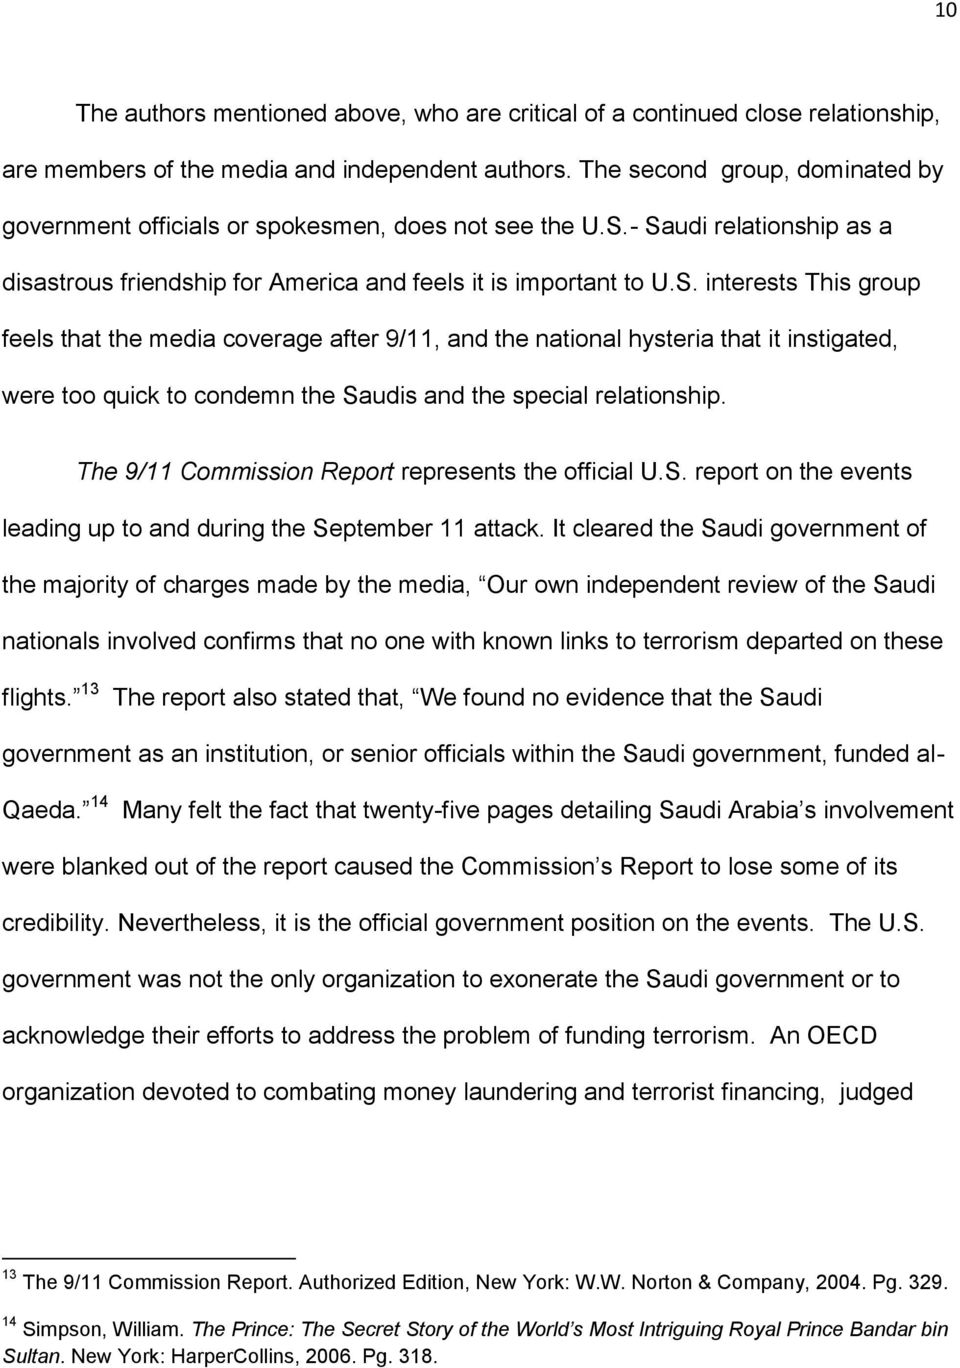 - Saudi relationship as a disastrous friendship for America and feels it is important to U.S. interests This group feels that the media coverage after 9/11, and the national hysteria that it instigated, were too quick to condemn the Saudis and the special relationship.